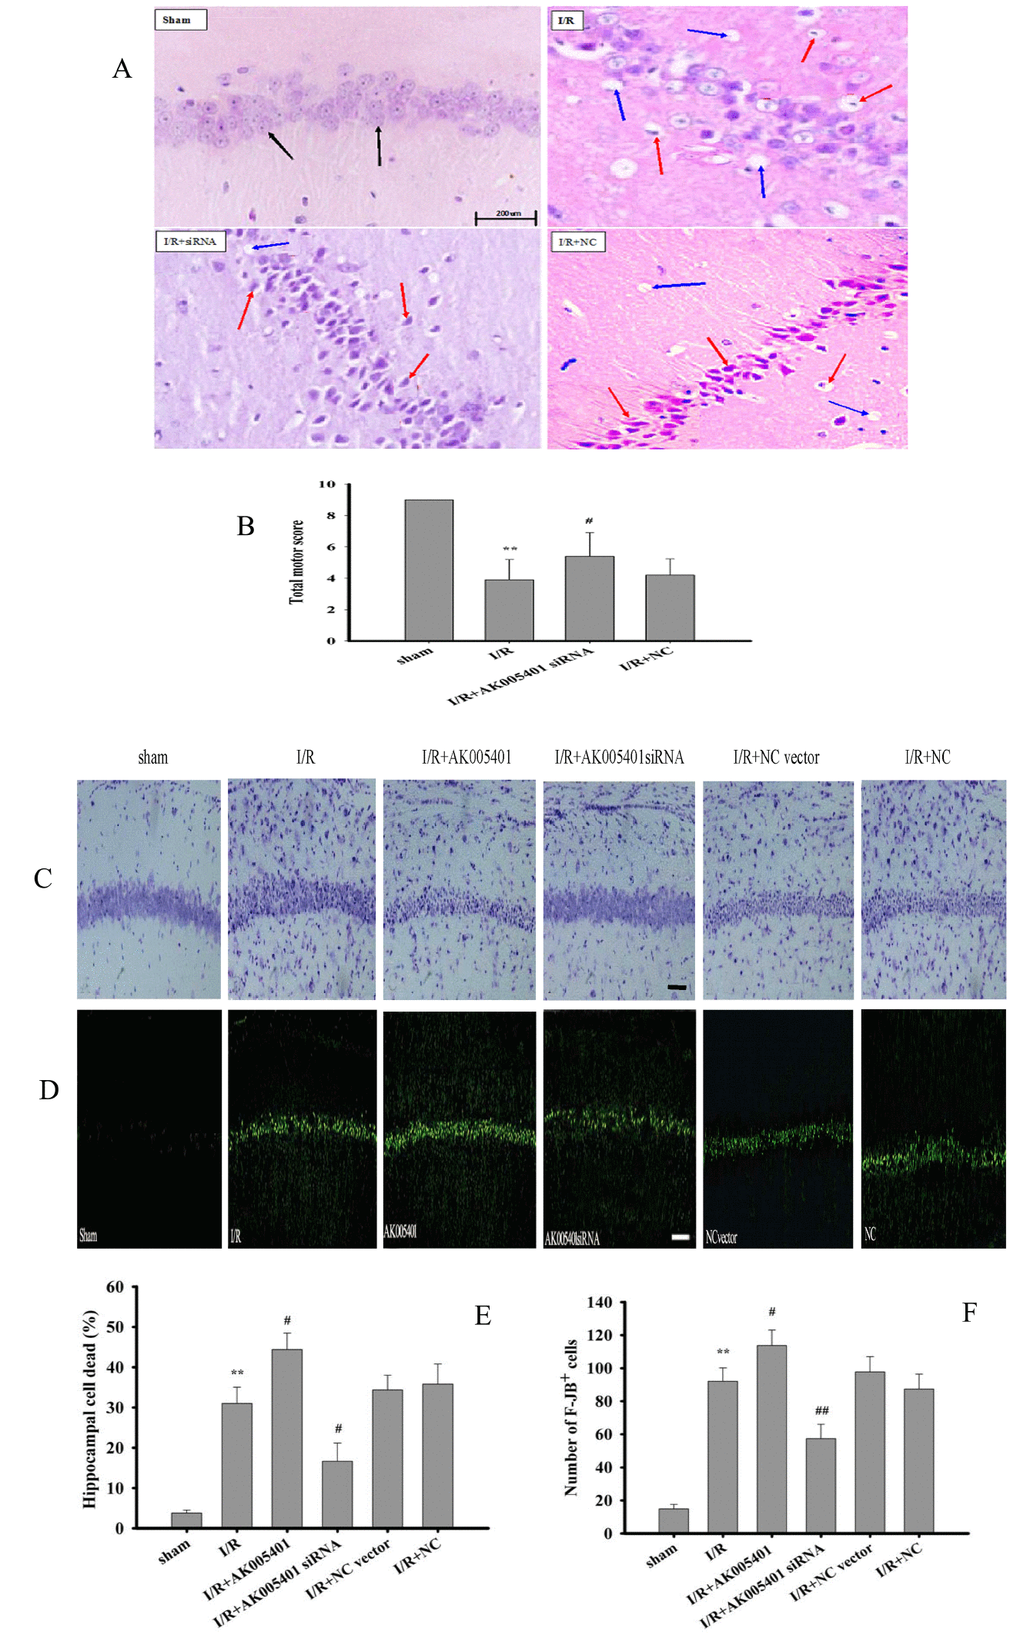 Effect of AK005401on ischemia/reperfusion (I/R) induced mice hippocampus pathomorphology and motor score. The mice were divided into four groups: sham, I/R, AKsiRNA, and NC. In addition, AK005401 overexpression vector group and NC vector group were added. After reperfusion for 24 hours, the motor score of each mouse was obtained according to the neurological test method. The brains were fixed, embedded in paraffin, cut into 4-μm-thick sections, and stained with HE, cresyl violet and FJB. (A) The neurons in the CA1 hippocampus stained with HE were observed by light microscopy. Light microscopy shows normal neuronal cells (black solid line arrows), pathological neurons with shrunken cytoplasm, damaged nuclei (red solid line arrows), and vacuolization (blue solid line arrows). (B) Total motor scores in all groups were showed (n = 15). (C) The neurons stained with cresyl violet were observed by light microscopy. (D) The neurons stained with FJB were observed by light microscopy. (E) The percentage of cell deaths was analyzed (n=3). (F) F-JB+ cells were counted (n=3). Data were presented as mean±SD. One-way ANOVA test was used to determine statistical significance. **P #P 